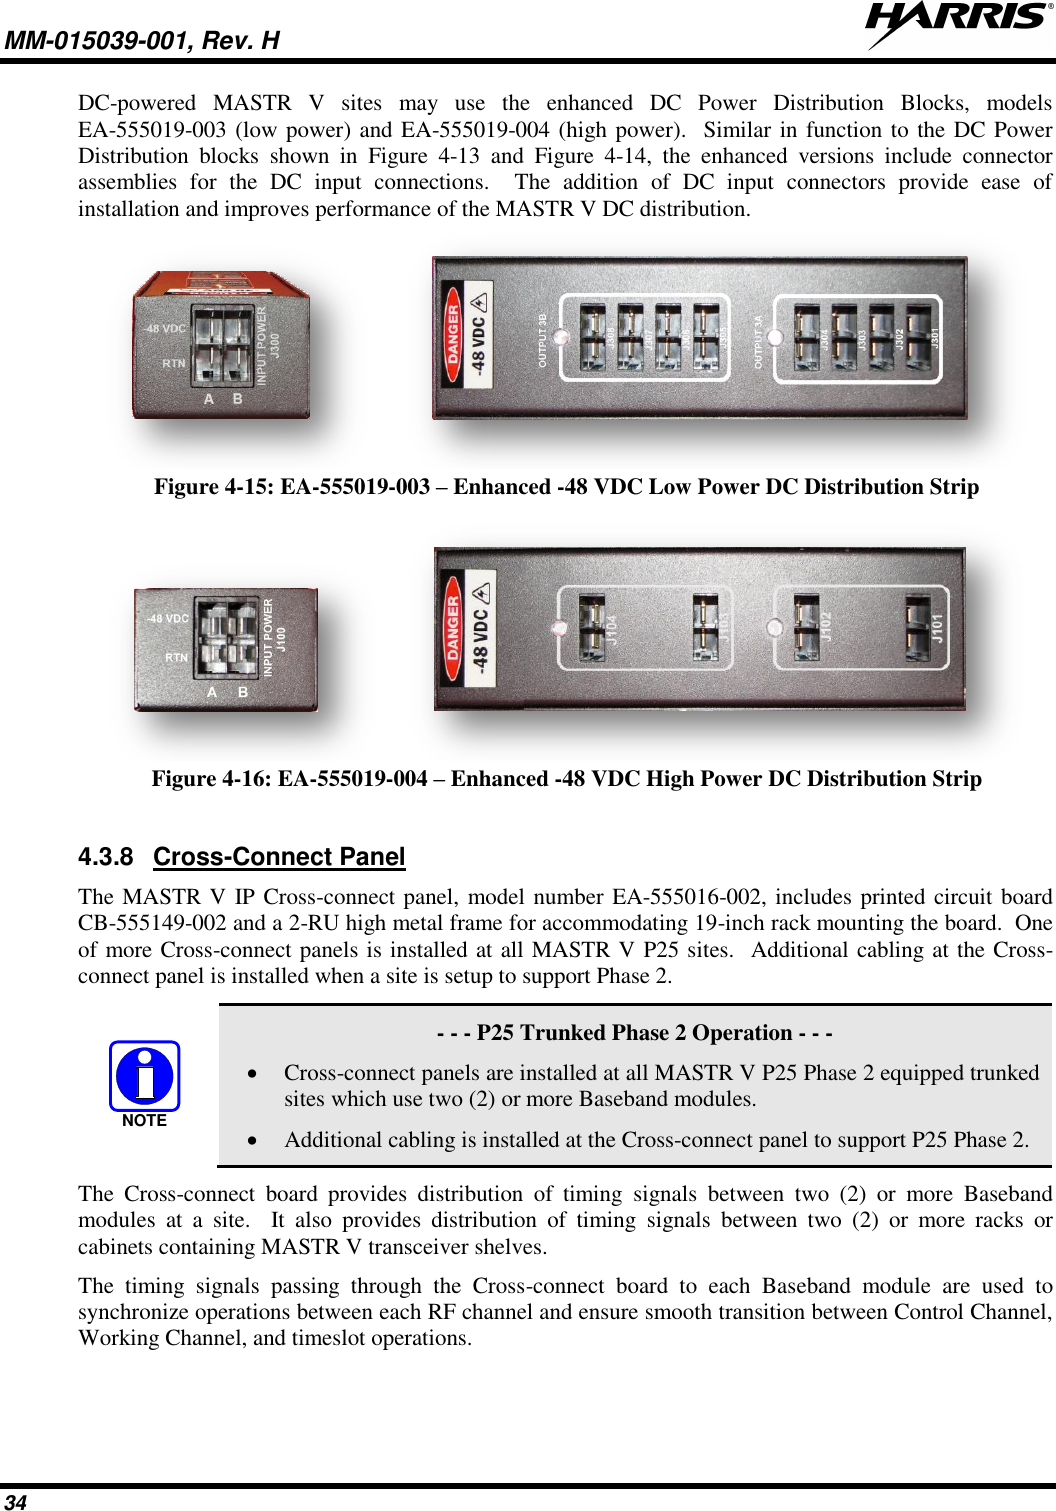 MM-015039-001, Rev. H     34 DC-powered  MASTR  V  sites  may  use  the  enhanced  DC  Power  Distribution  Blocks,  models EA-555019-003 (low power) and EA-555019-004 (high power).  Similar in function to the DC Power Distribution  blocks  shown  in  Figure  4-13  and  Figure  4-14,  the  enhanced  versions  include  connector assemblies  for  the  DC  input  connections.    The  addition  of  DC  input  connectors  provide  ease  of installation and improves performance of the MASTR V DC distribution.    Figure 4-15: EA-555019-003 – Enhanced -48 VDC Low Power DC Distribution Strip     Figure 4-16: EA-555019-004 – Enhanced -48 VDC High Power DC Distribution Strip  4.3.8  Cross-Connect Panel The MASTR V IP Cross-connect panel, model number EA-555016-002, includes printed circuit board CB-555149-002 and a 2-RU high metal frame for accommodating 19-inch rack mounting the board.  One of more Cross-connect panels is installed at all MASTR V P25 sites.  Additional cabling at the Cross-connect panel is installed when a site is setup to support Phase 2.     - - - P25 Trunked Phase 2 Operation - - -  Cross-connect panels are installed at all MASTR V P25 Phase 2 equipped trunked sites which use two (2) or more Baseband modules.  Additional cabling is installed at the Cross-connect panel to support P25 Phase 2. The  Cross-connect  board  provides  distribution  of  timing  signals  between  two  (2)  or  more  Baseband modules  at  a  site.    It  also  provides  distribution  of  timing  signals  between  two  (2)  or  more  racks  or cabinets containing MASTR V transceiver shelves.   The  timing  signals  passing  through  the  Cross-connect  board  to  each  Baseband  module  are  used  to synchronize operations between each RF channel and ensure smooth transition between Control Channel, Working Channel, and timeslot operations.  NOTE